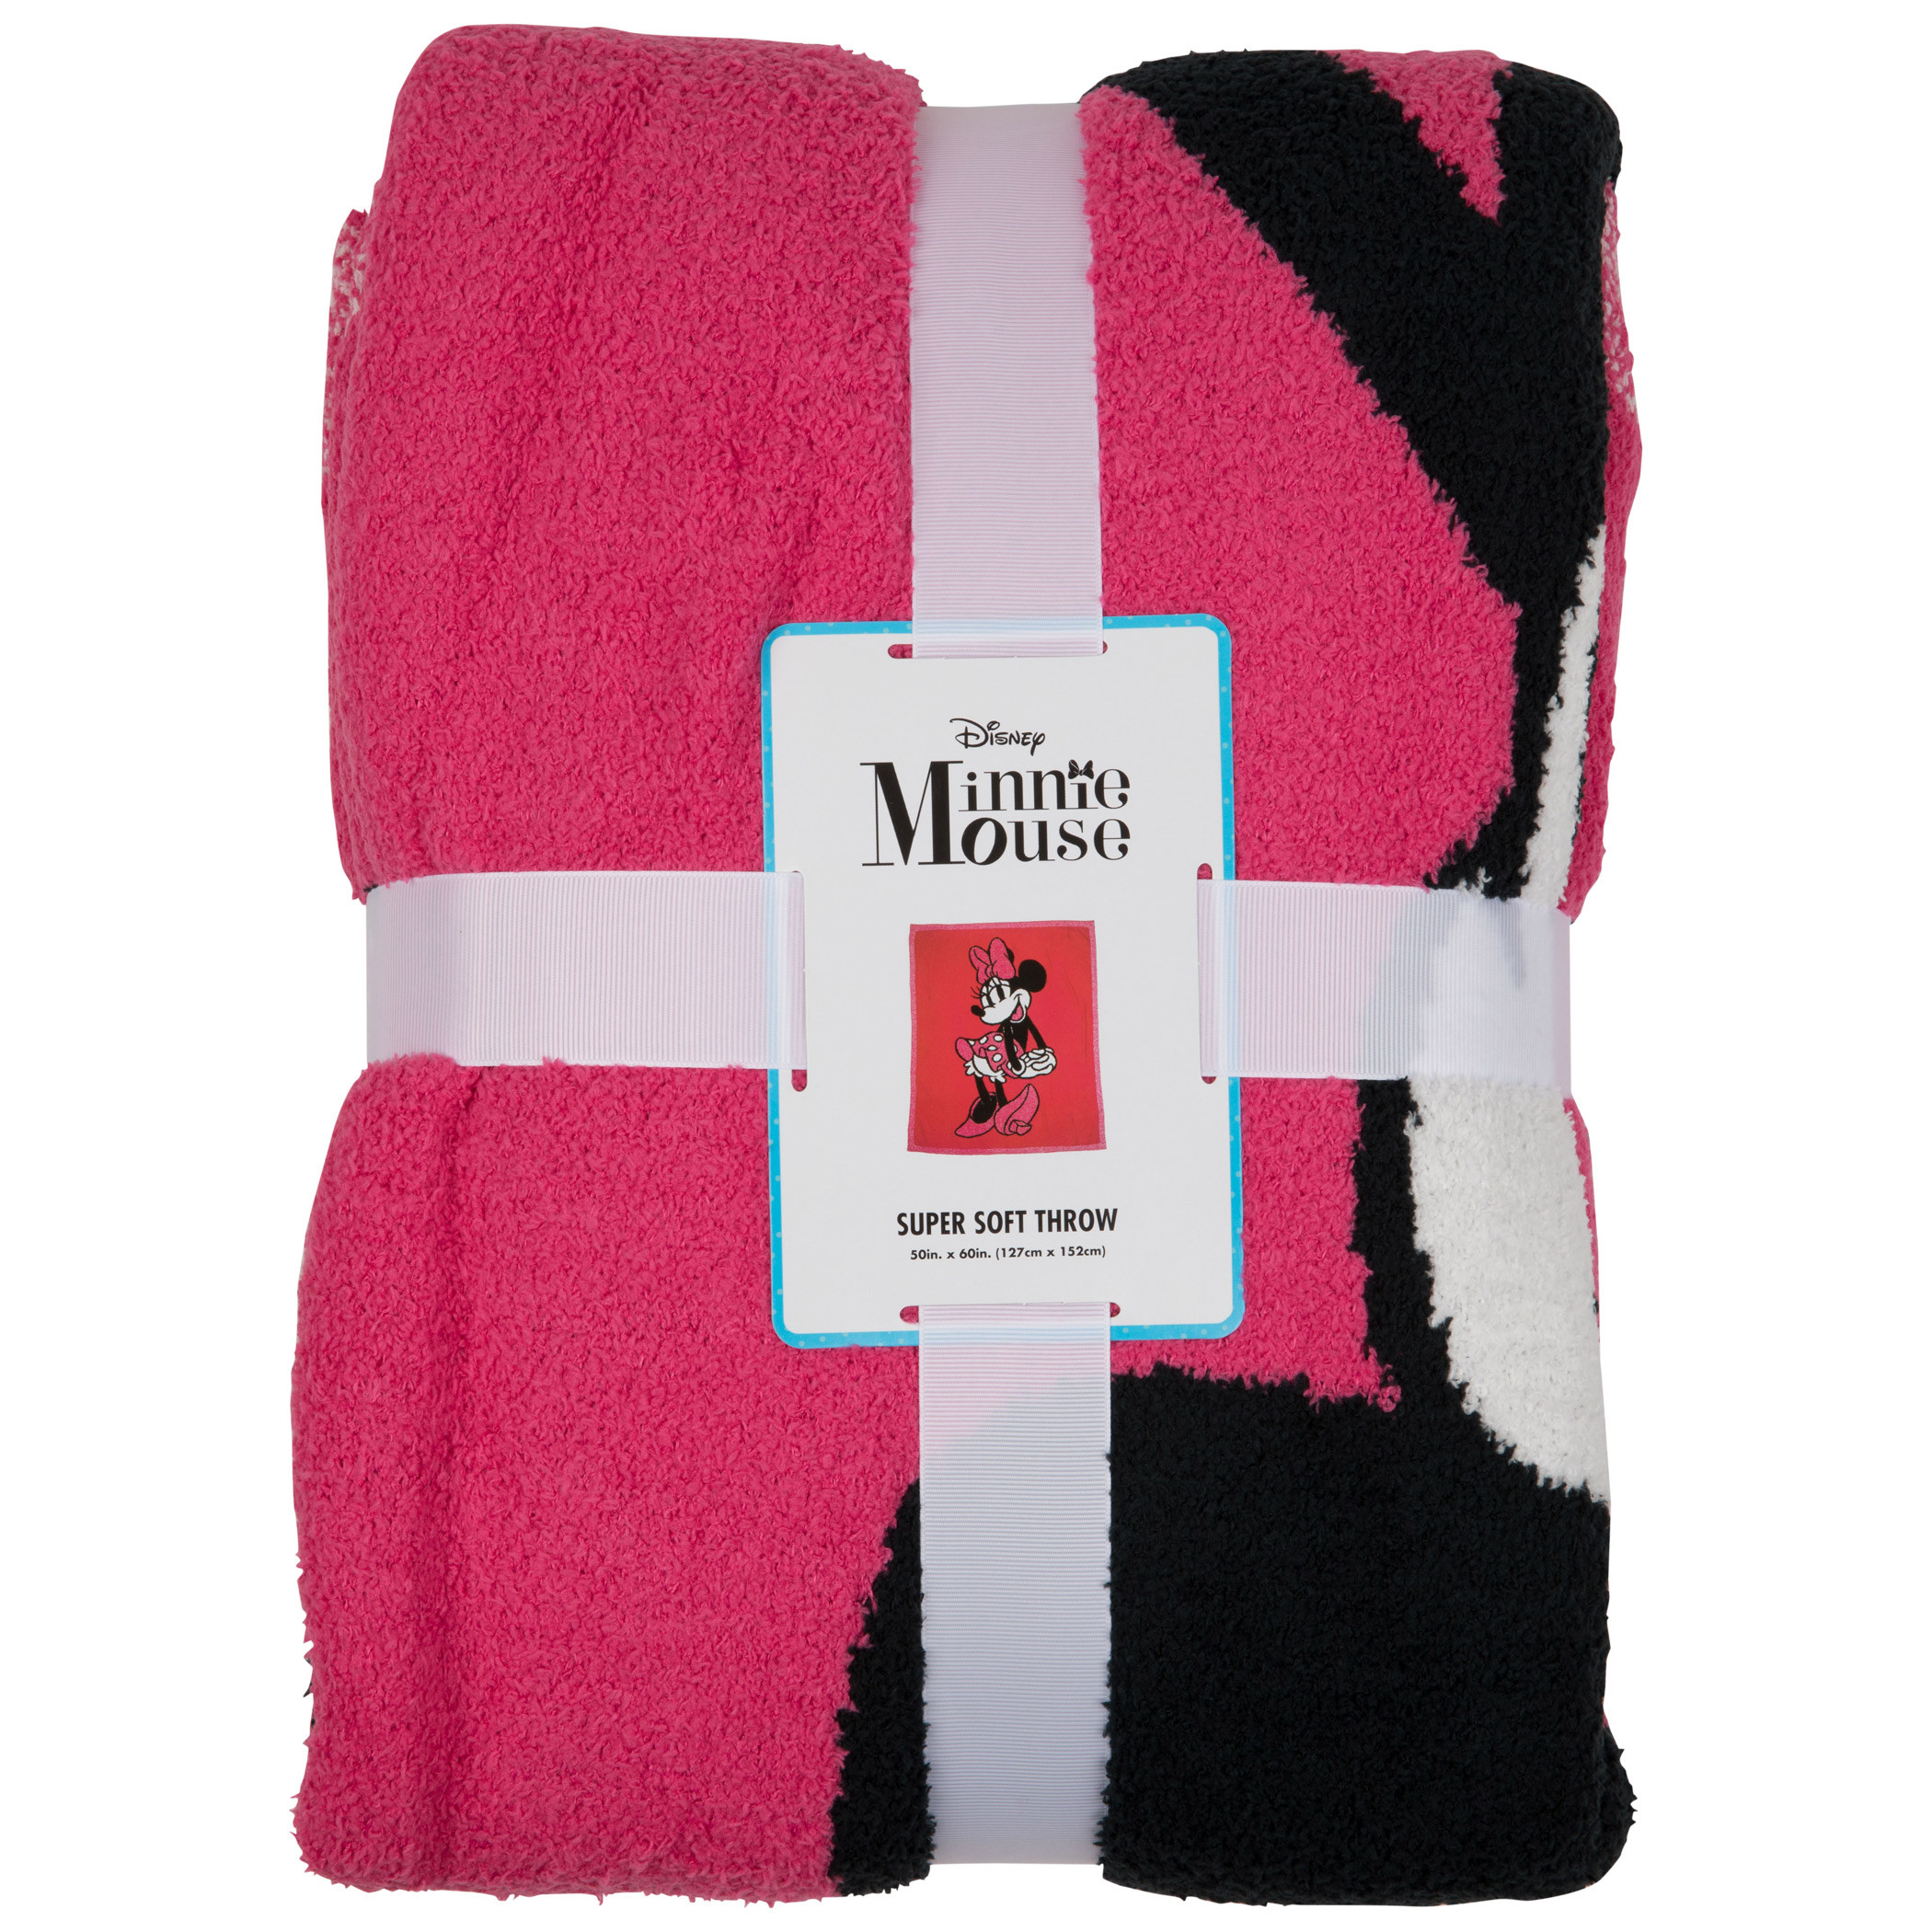 Minnie Mouse Pretty in Pink Throw Blanket